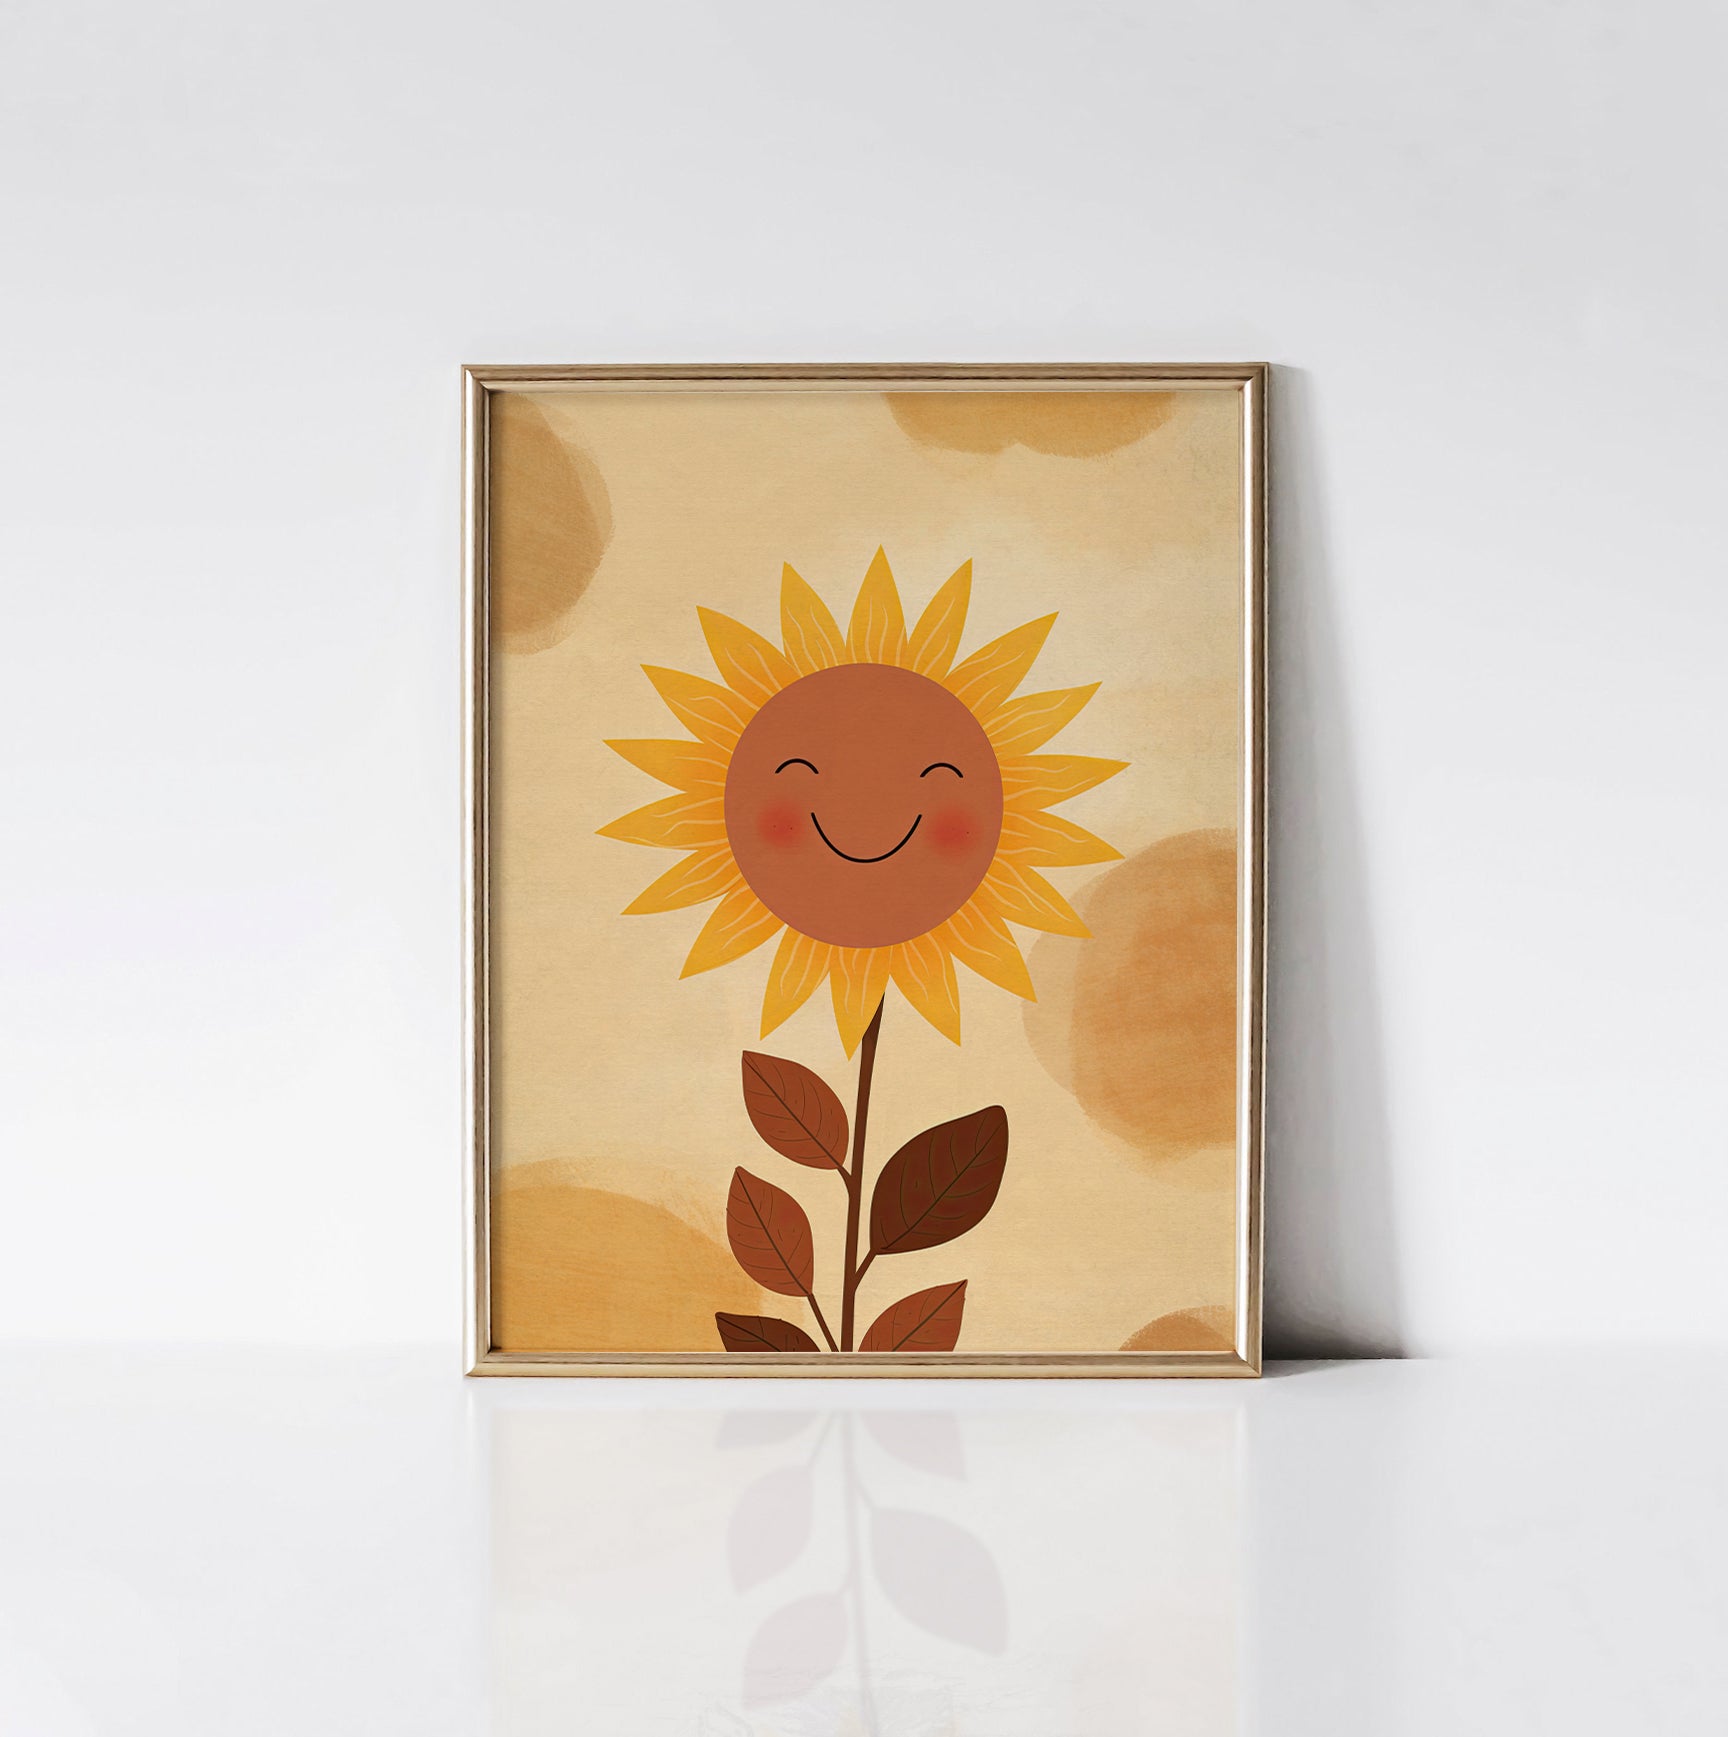 Sunshine Smile art print displayed in a sleek gold frame, featuring a smiling sunflower with radiant yellow petals and warm brown leaves on a soft beige background